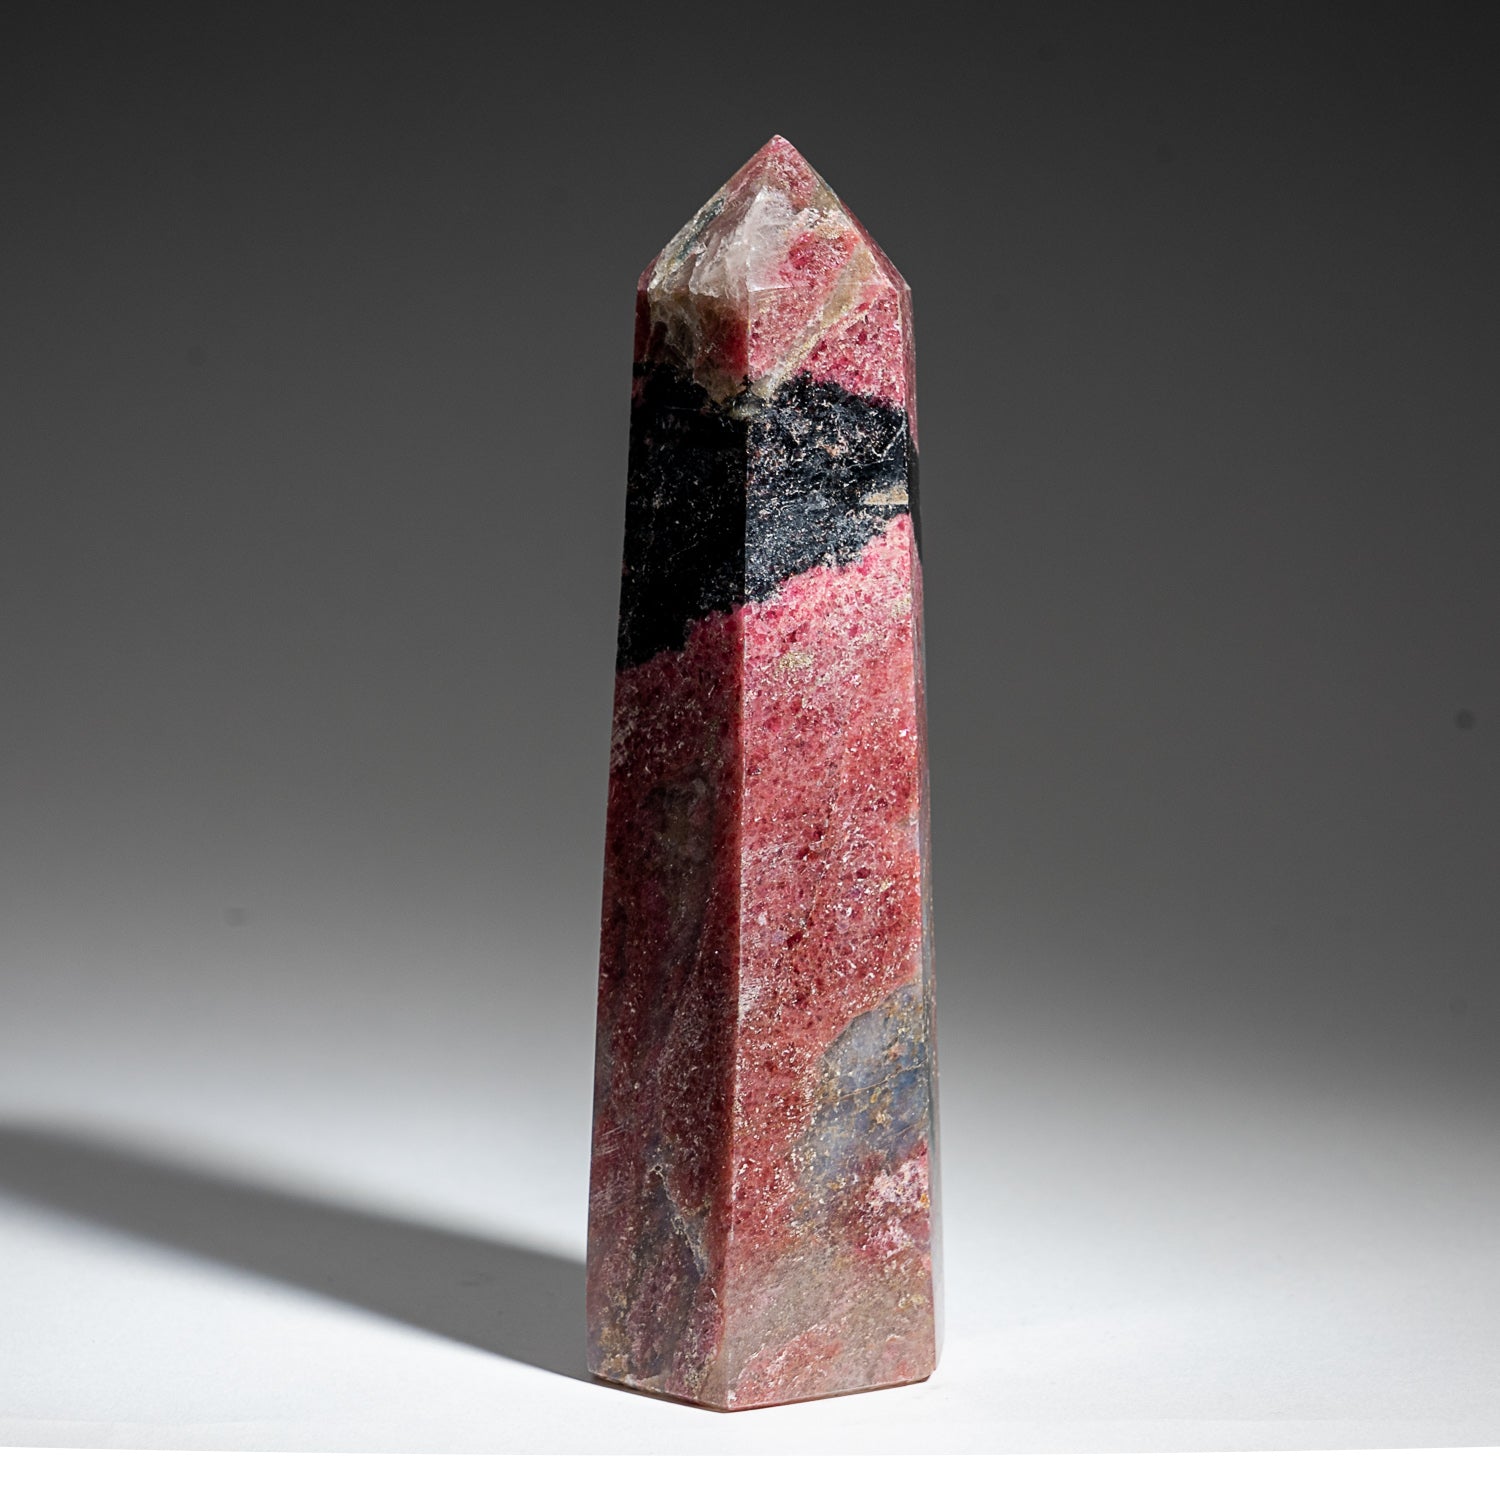 Genuine Polished Ruby Point from Madagascar (1.6 lbs)